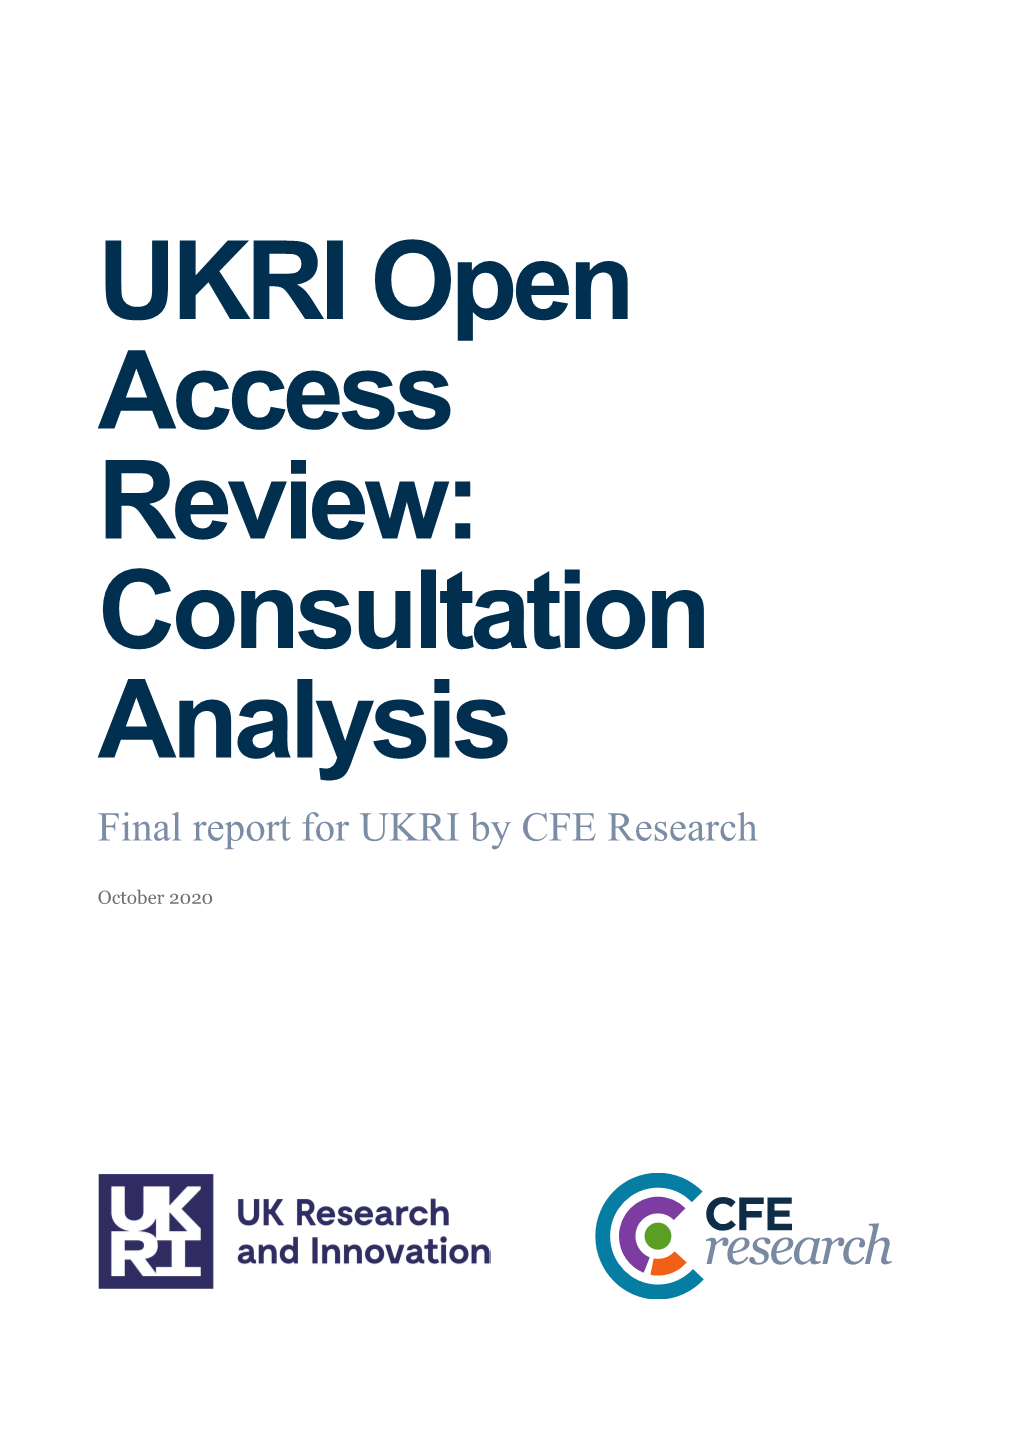 UKRI Open Access Review: Consultation Analysis (PDF)